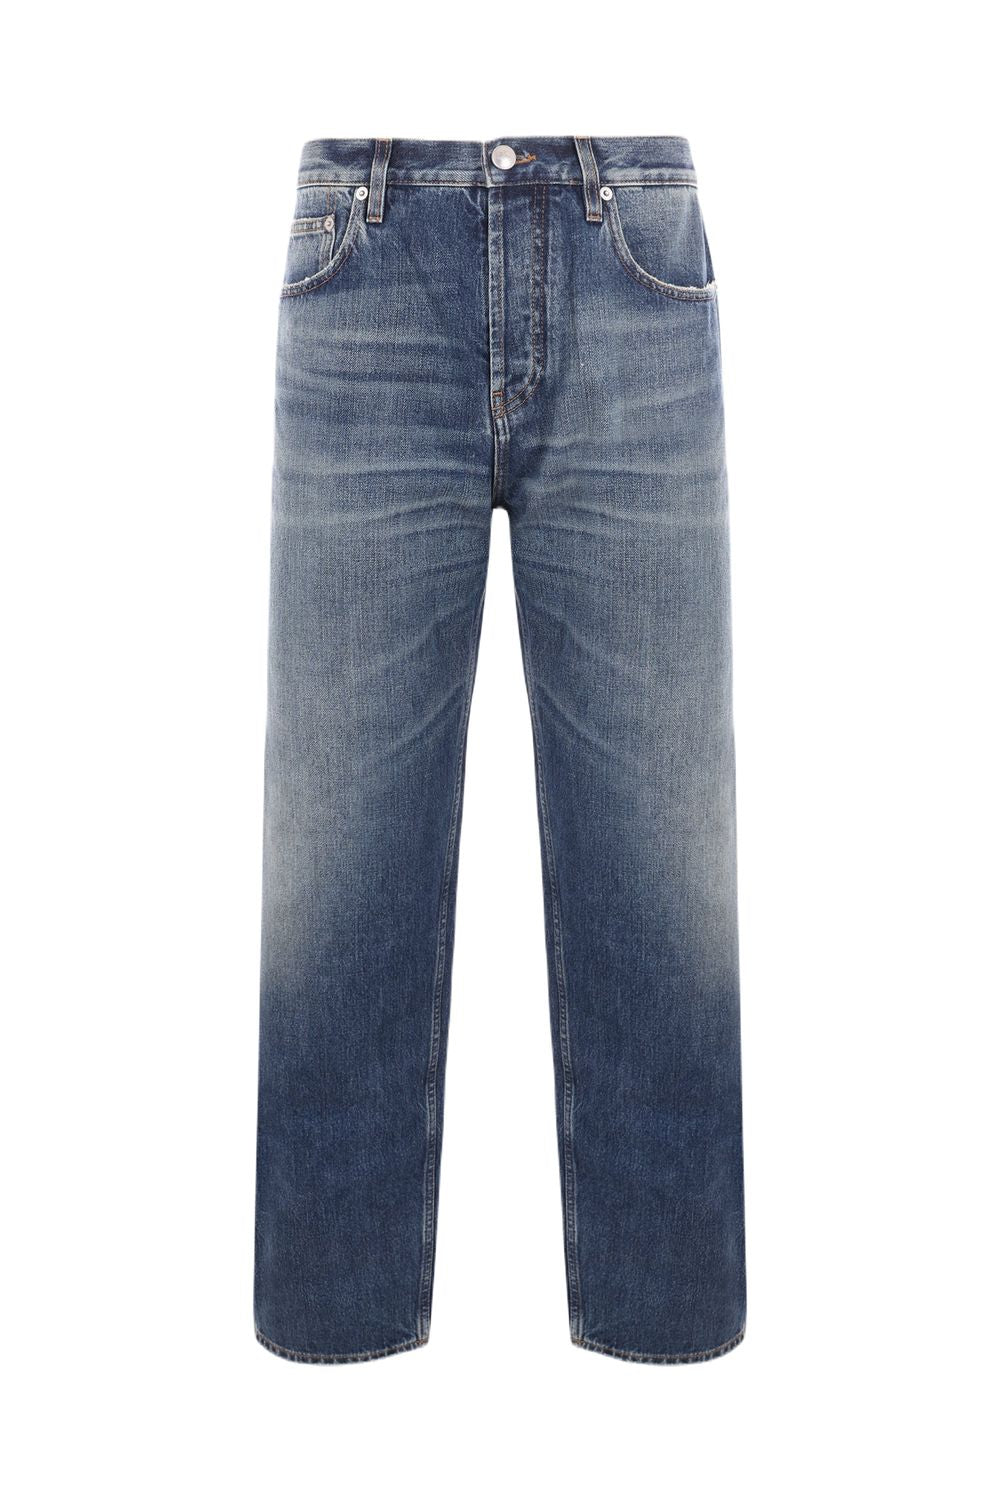 Burberry Loose Fit Blue Jeans For Women